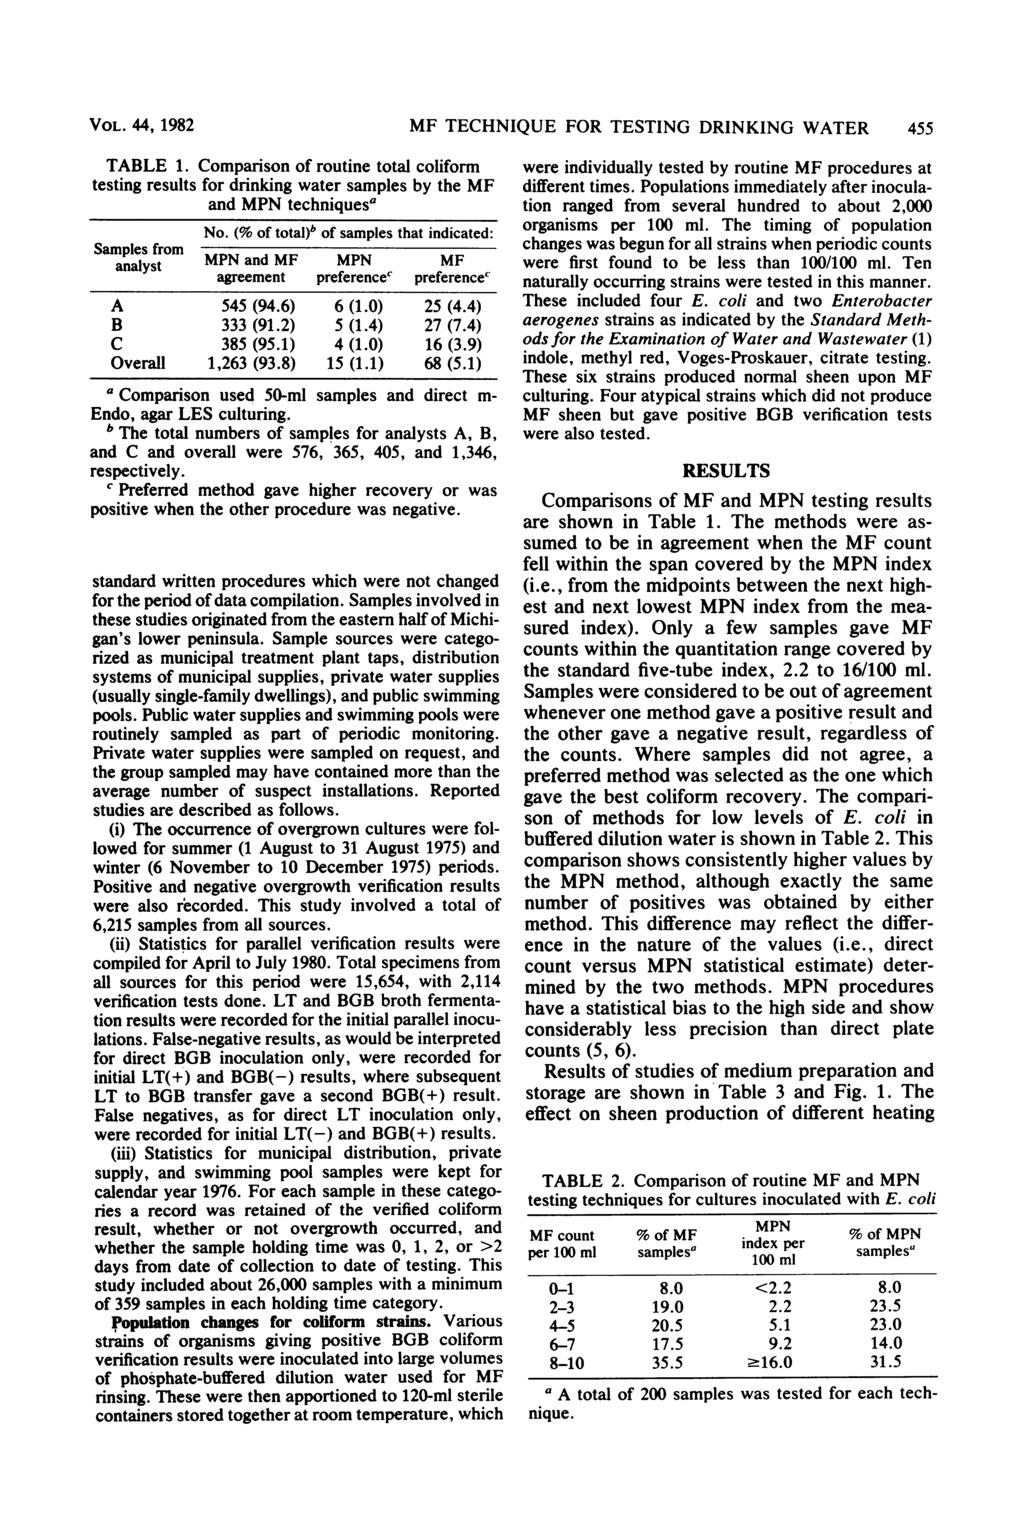 VOL. 44, 1982 TABLE 1. Comparison of routine total coliform testing results for drinking water samples by the MF and MPN techniques' No.